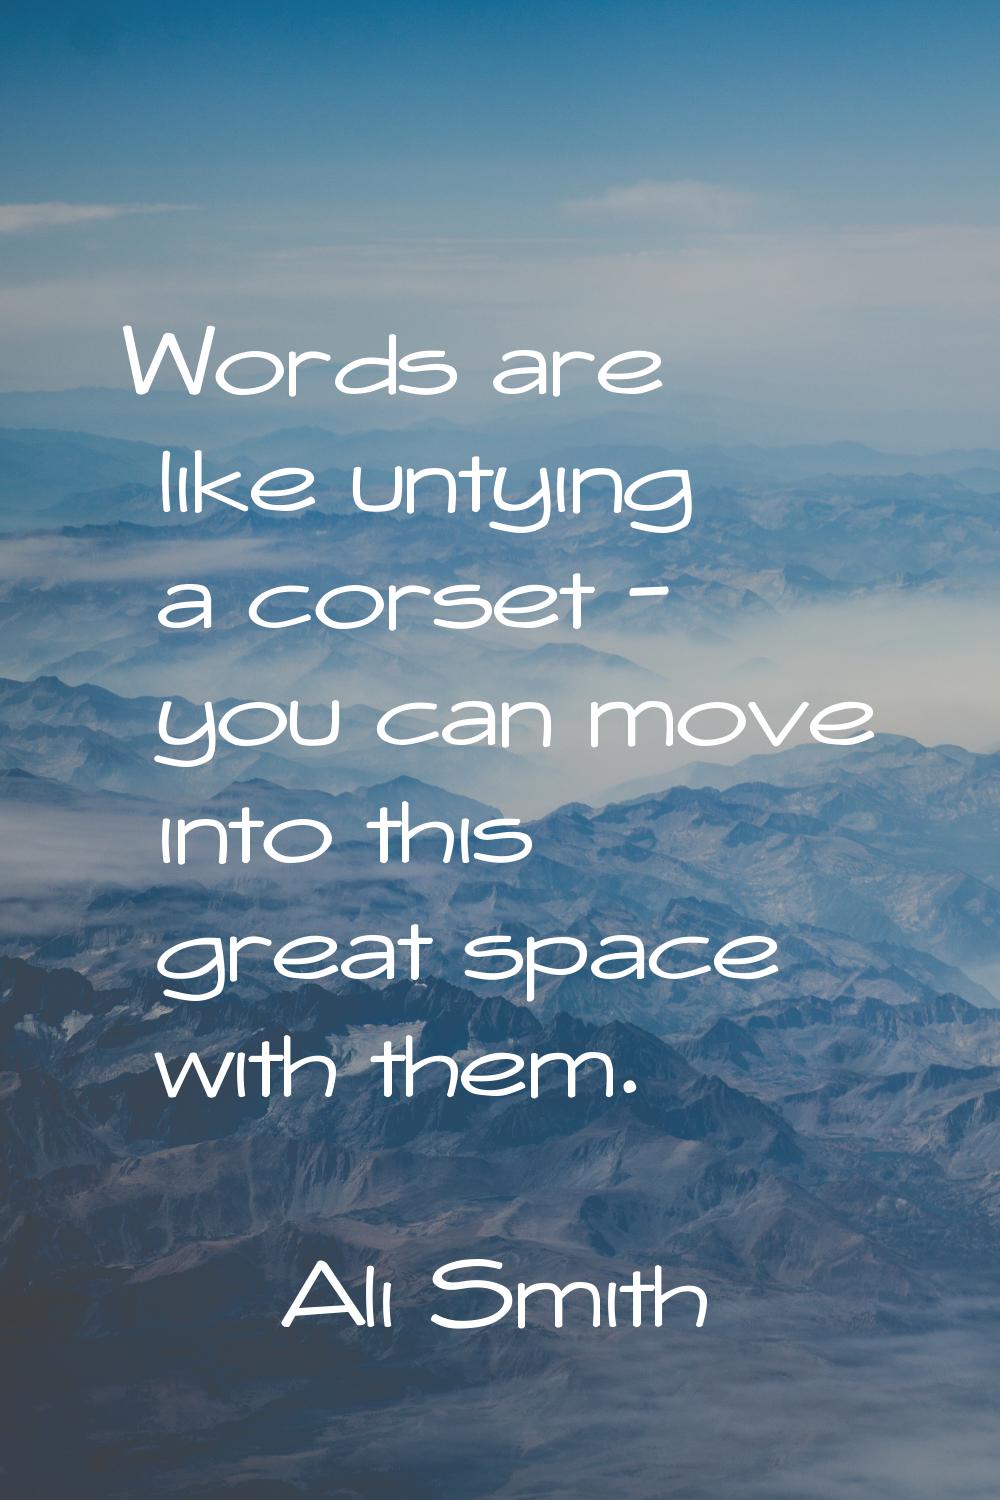 Words are like untying a corset - you can move into this great space with them.